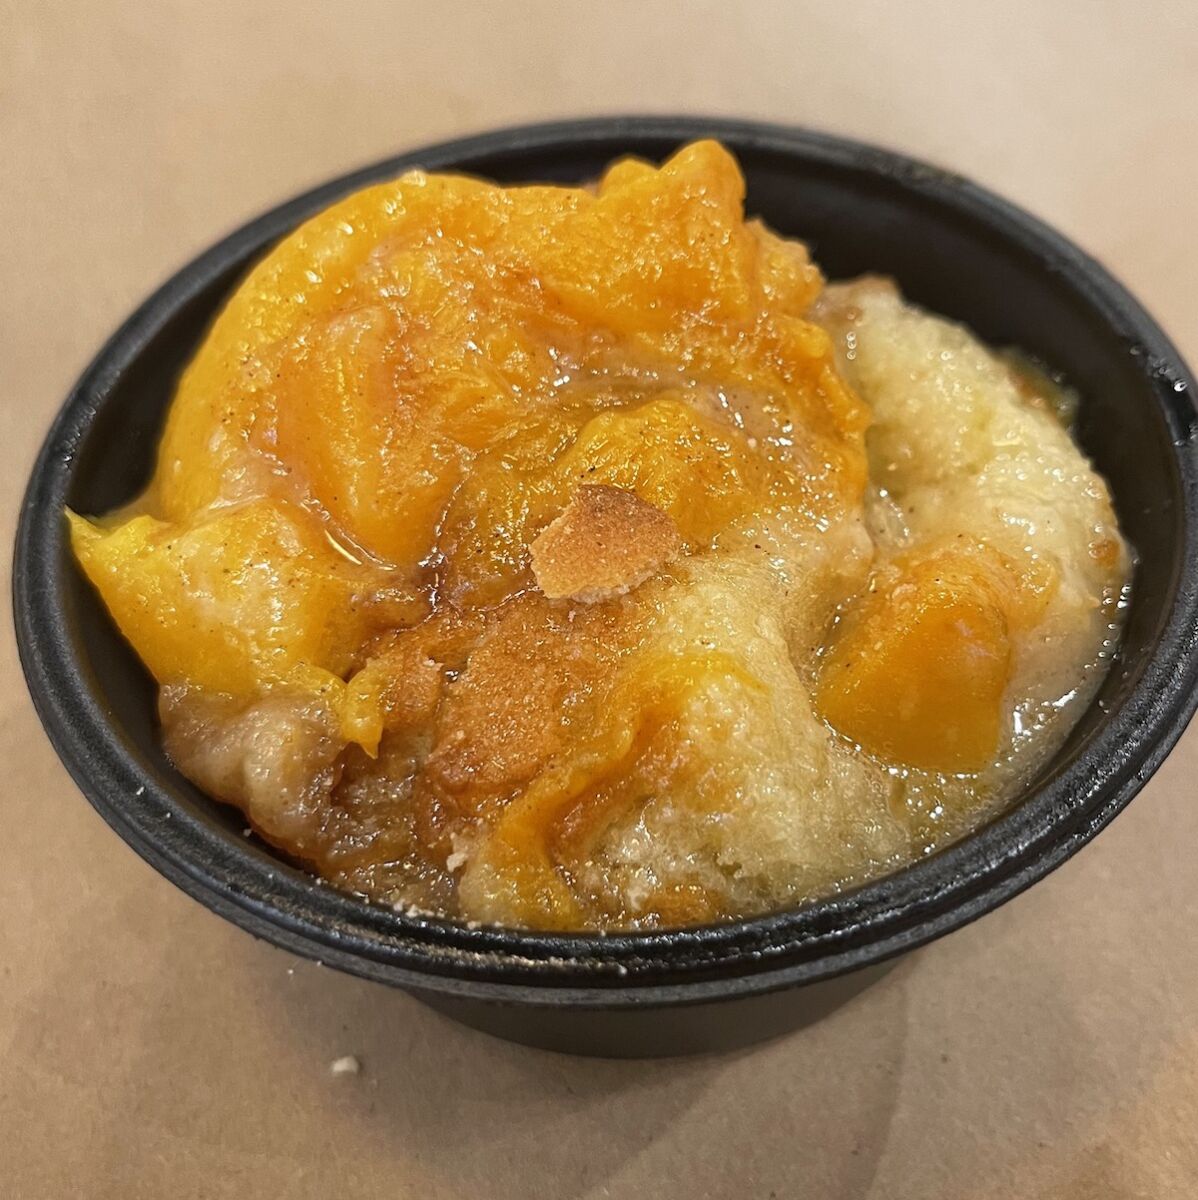 Peach Cobbler from Mission BBQ in Doral, Florida